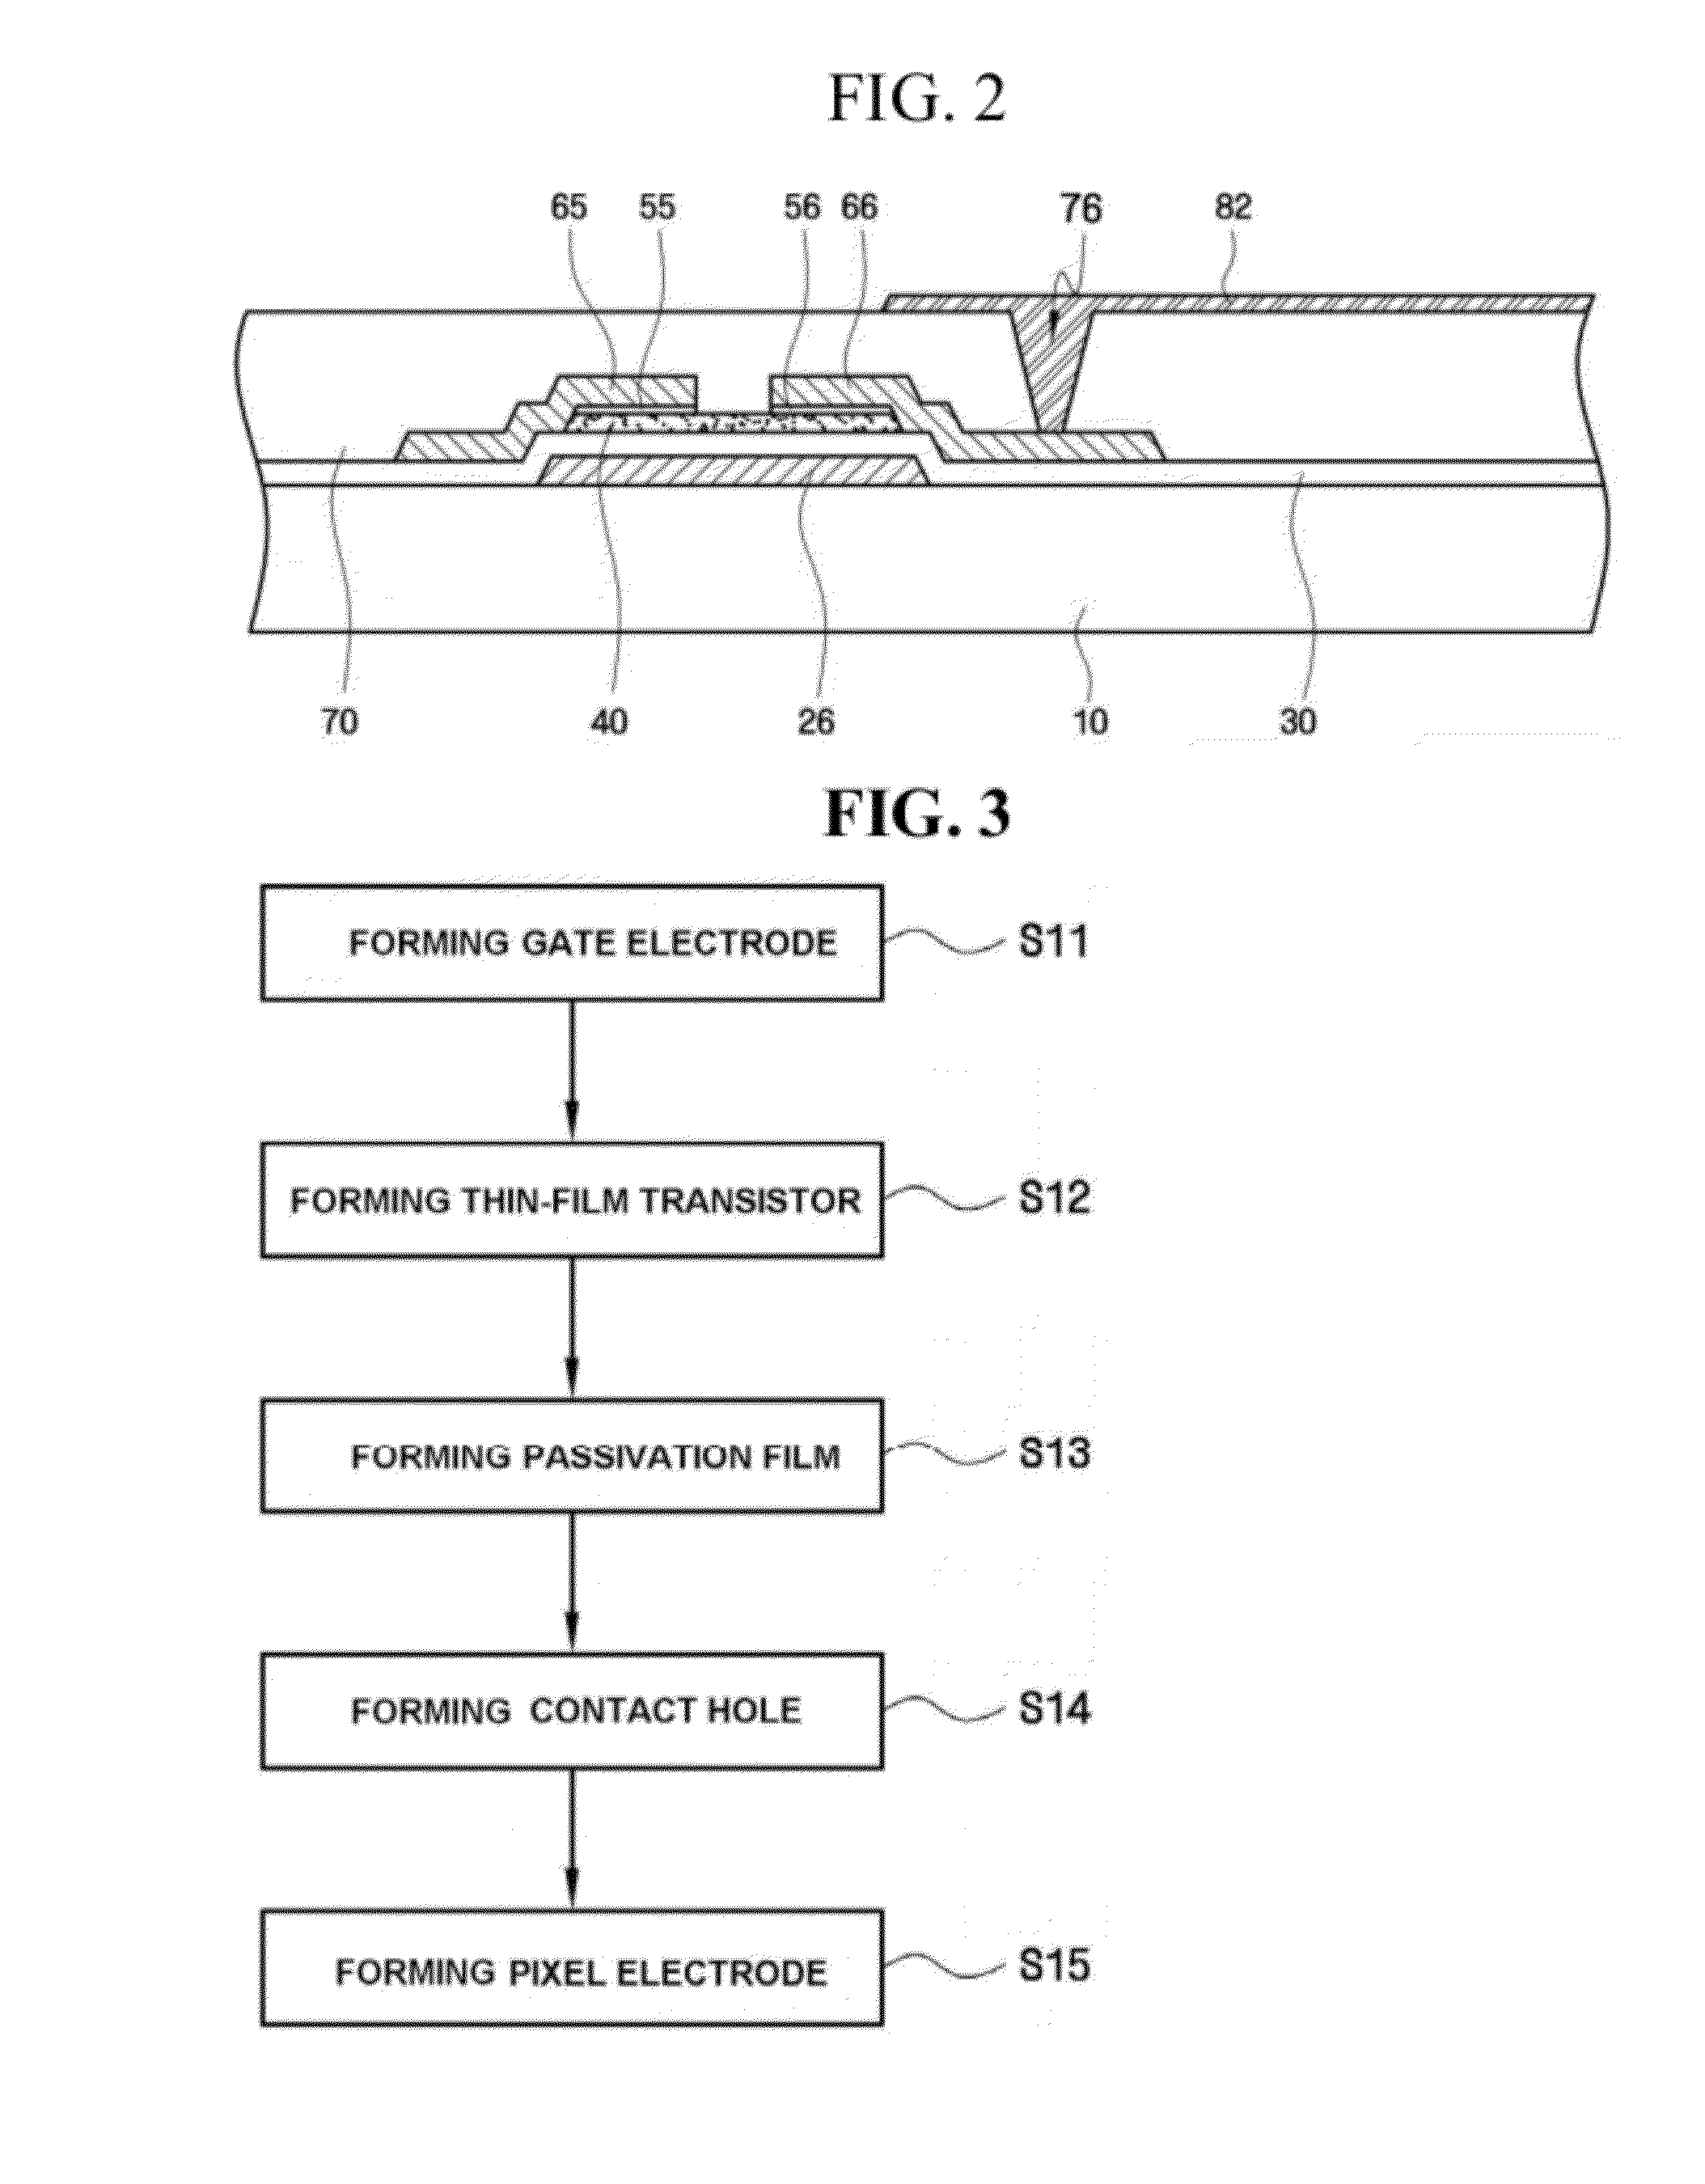 Thin-film transistor substrate and method of manufacturing the same